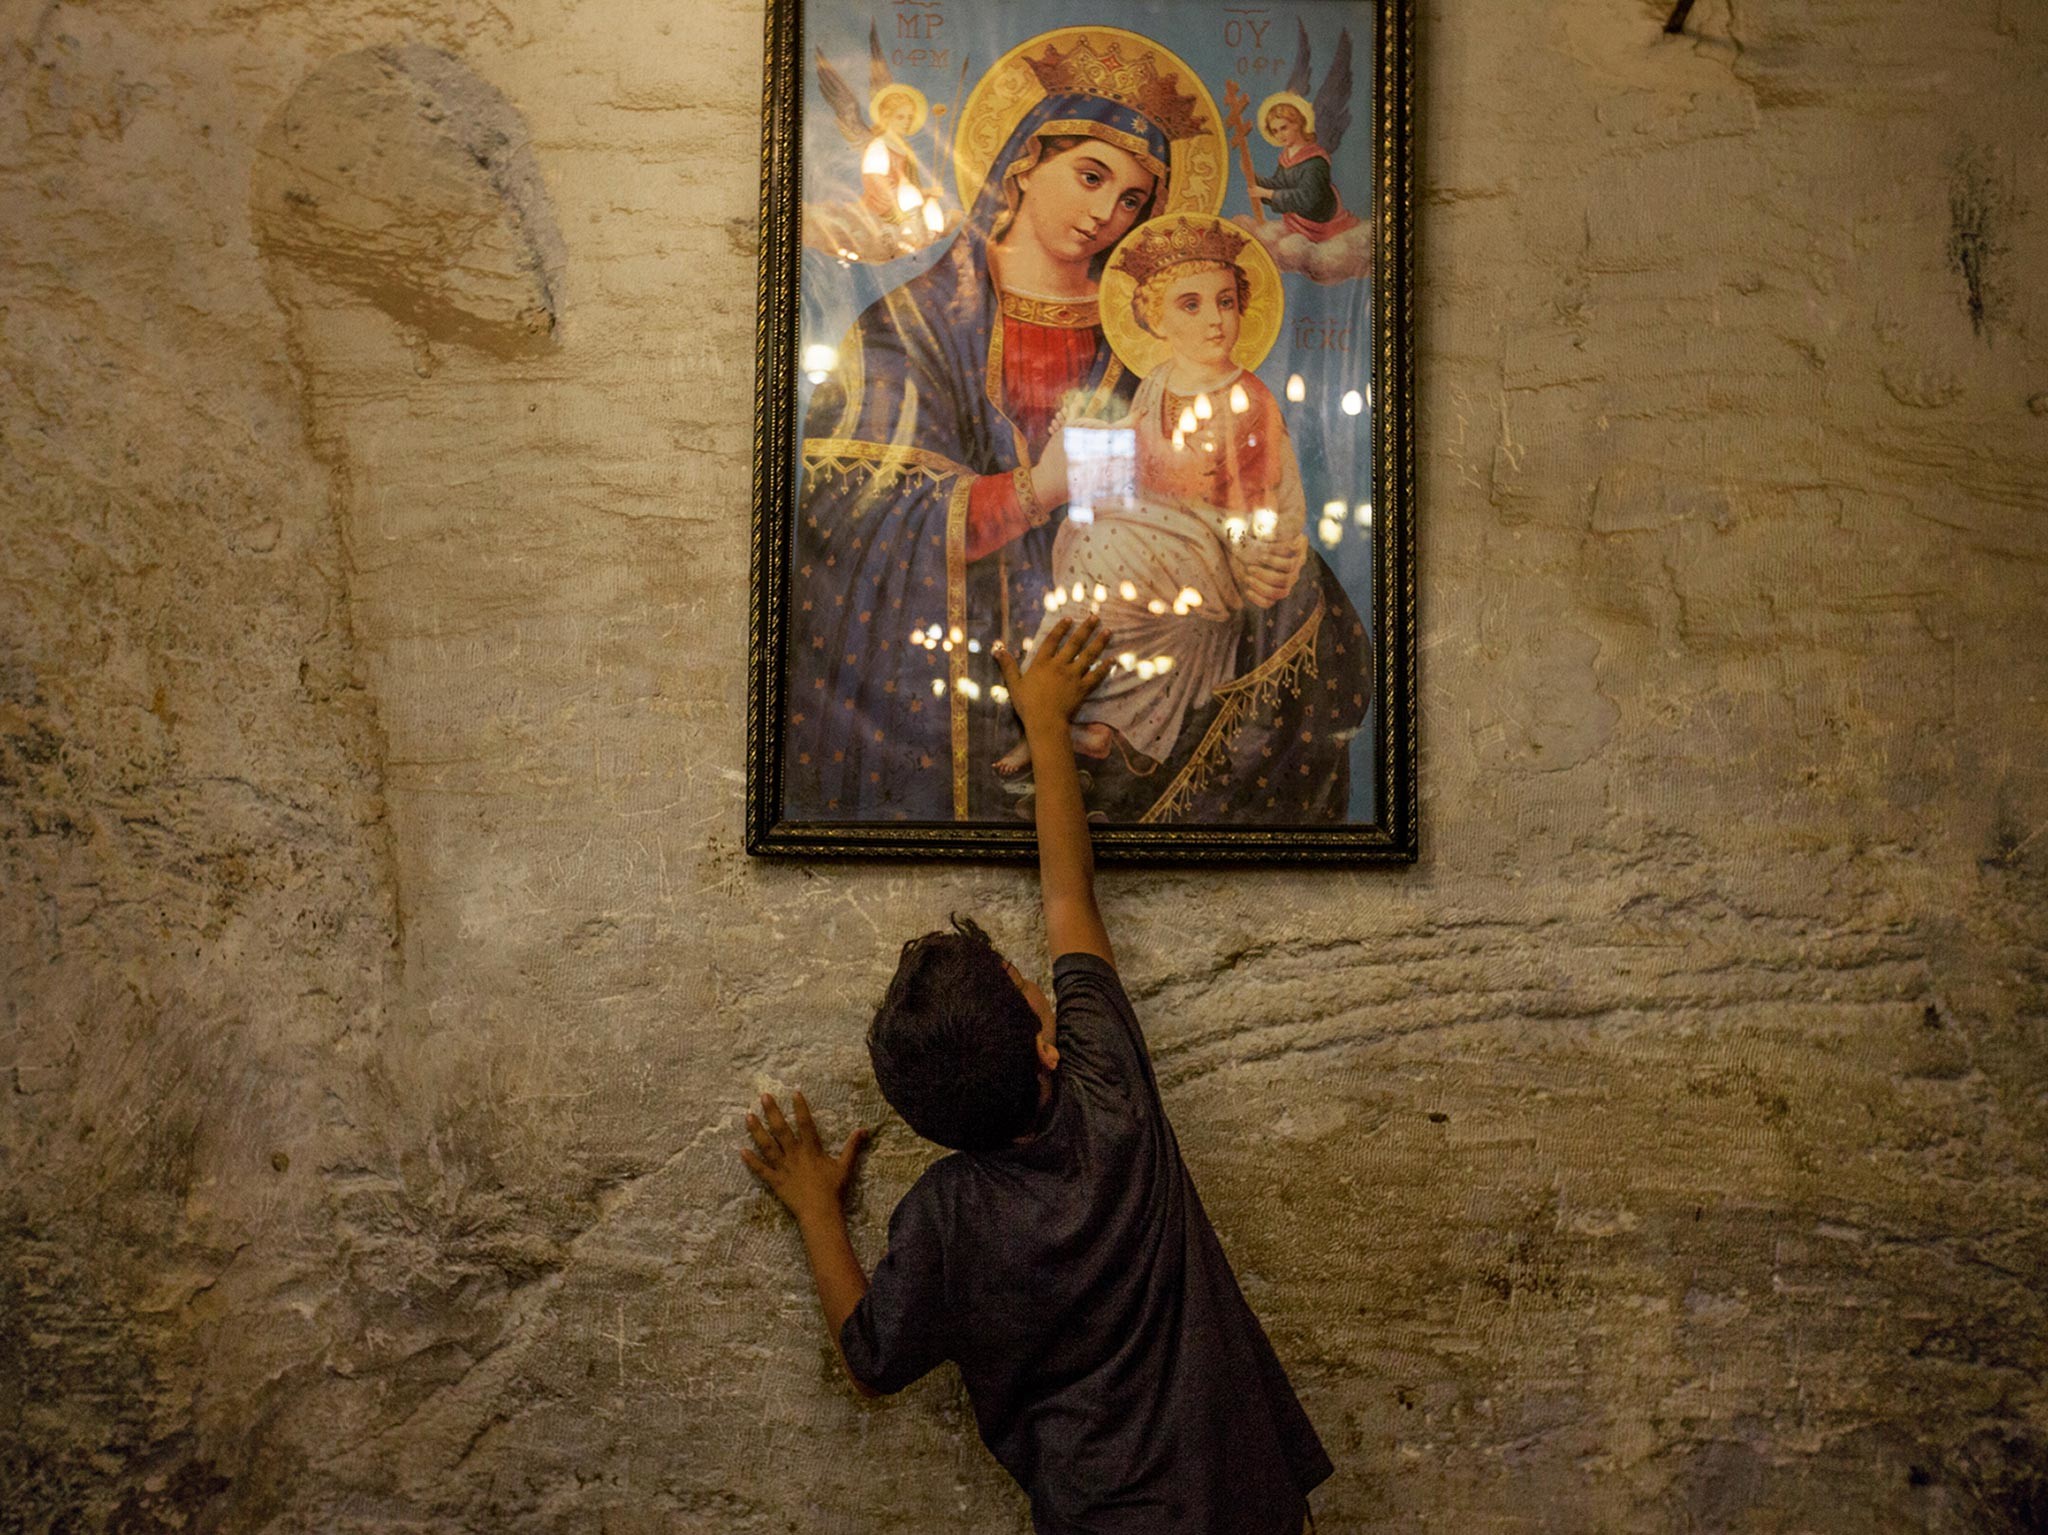 boy touches image of Mary and Jesus